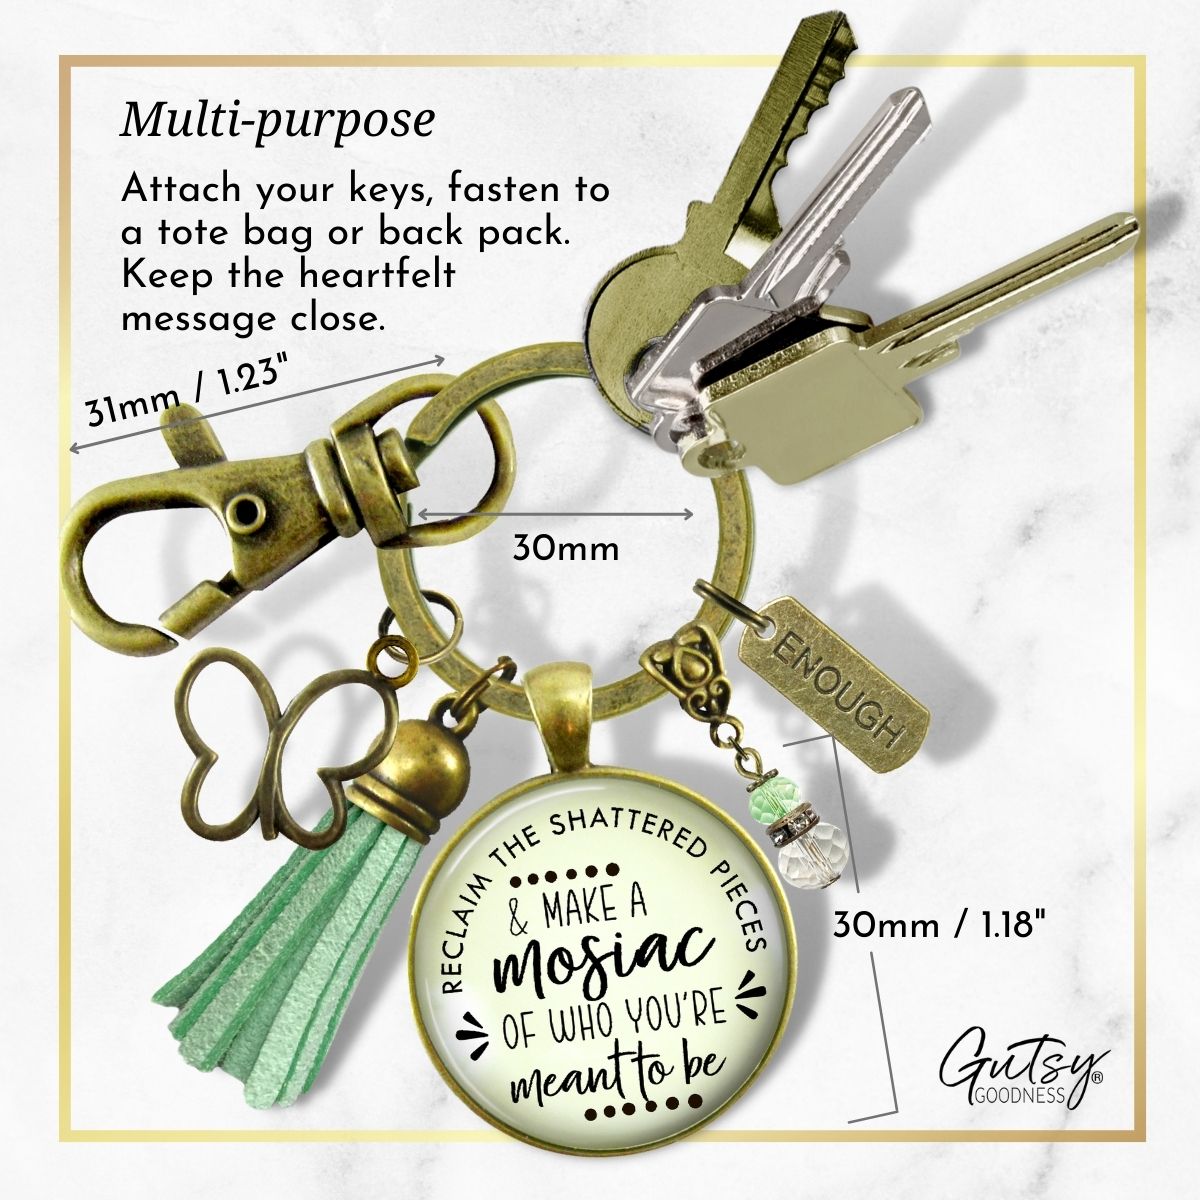 Handmade Gutsy Goodness Jewelry Reclaim The Shattered Pieces Make Mosaic Keychain Inspiring Jewelry Enough & Tassel Charm & Message Card